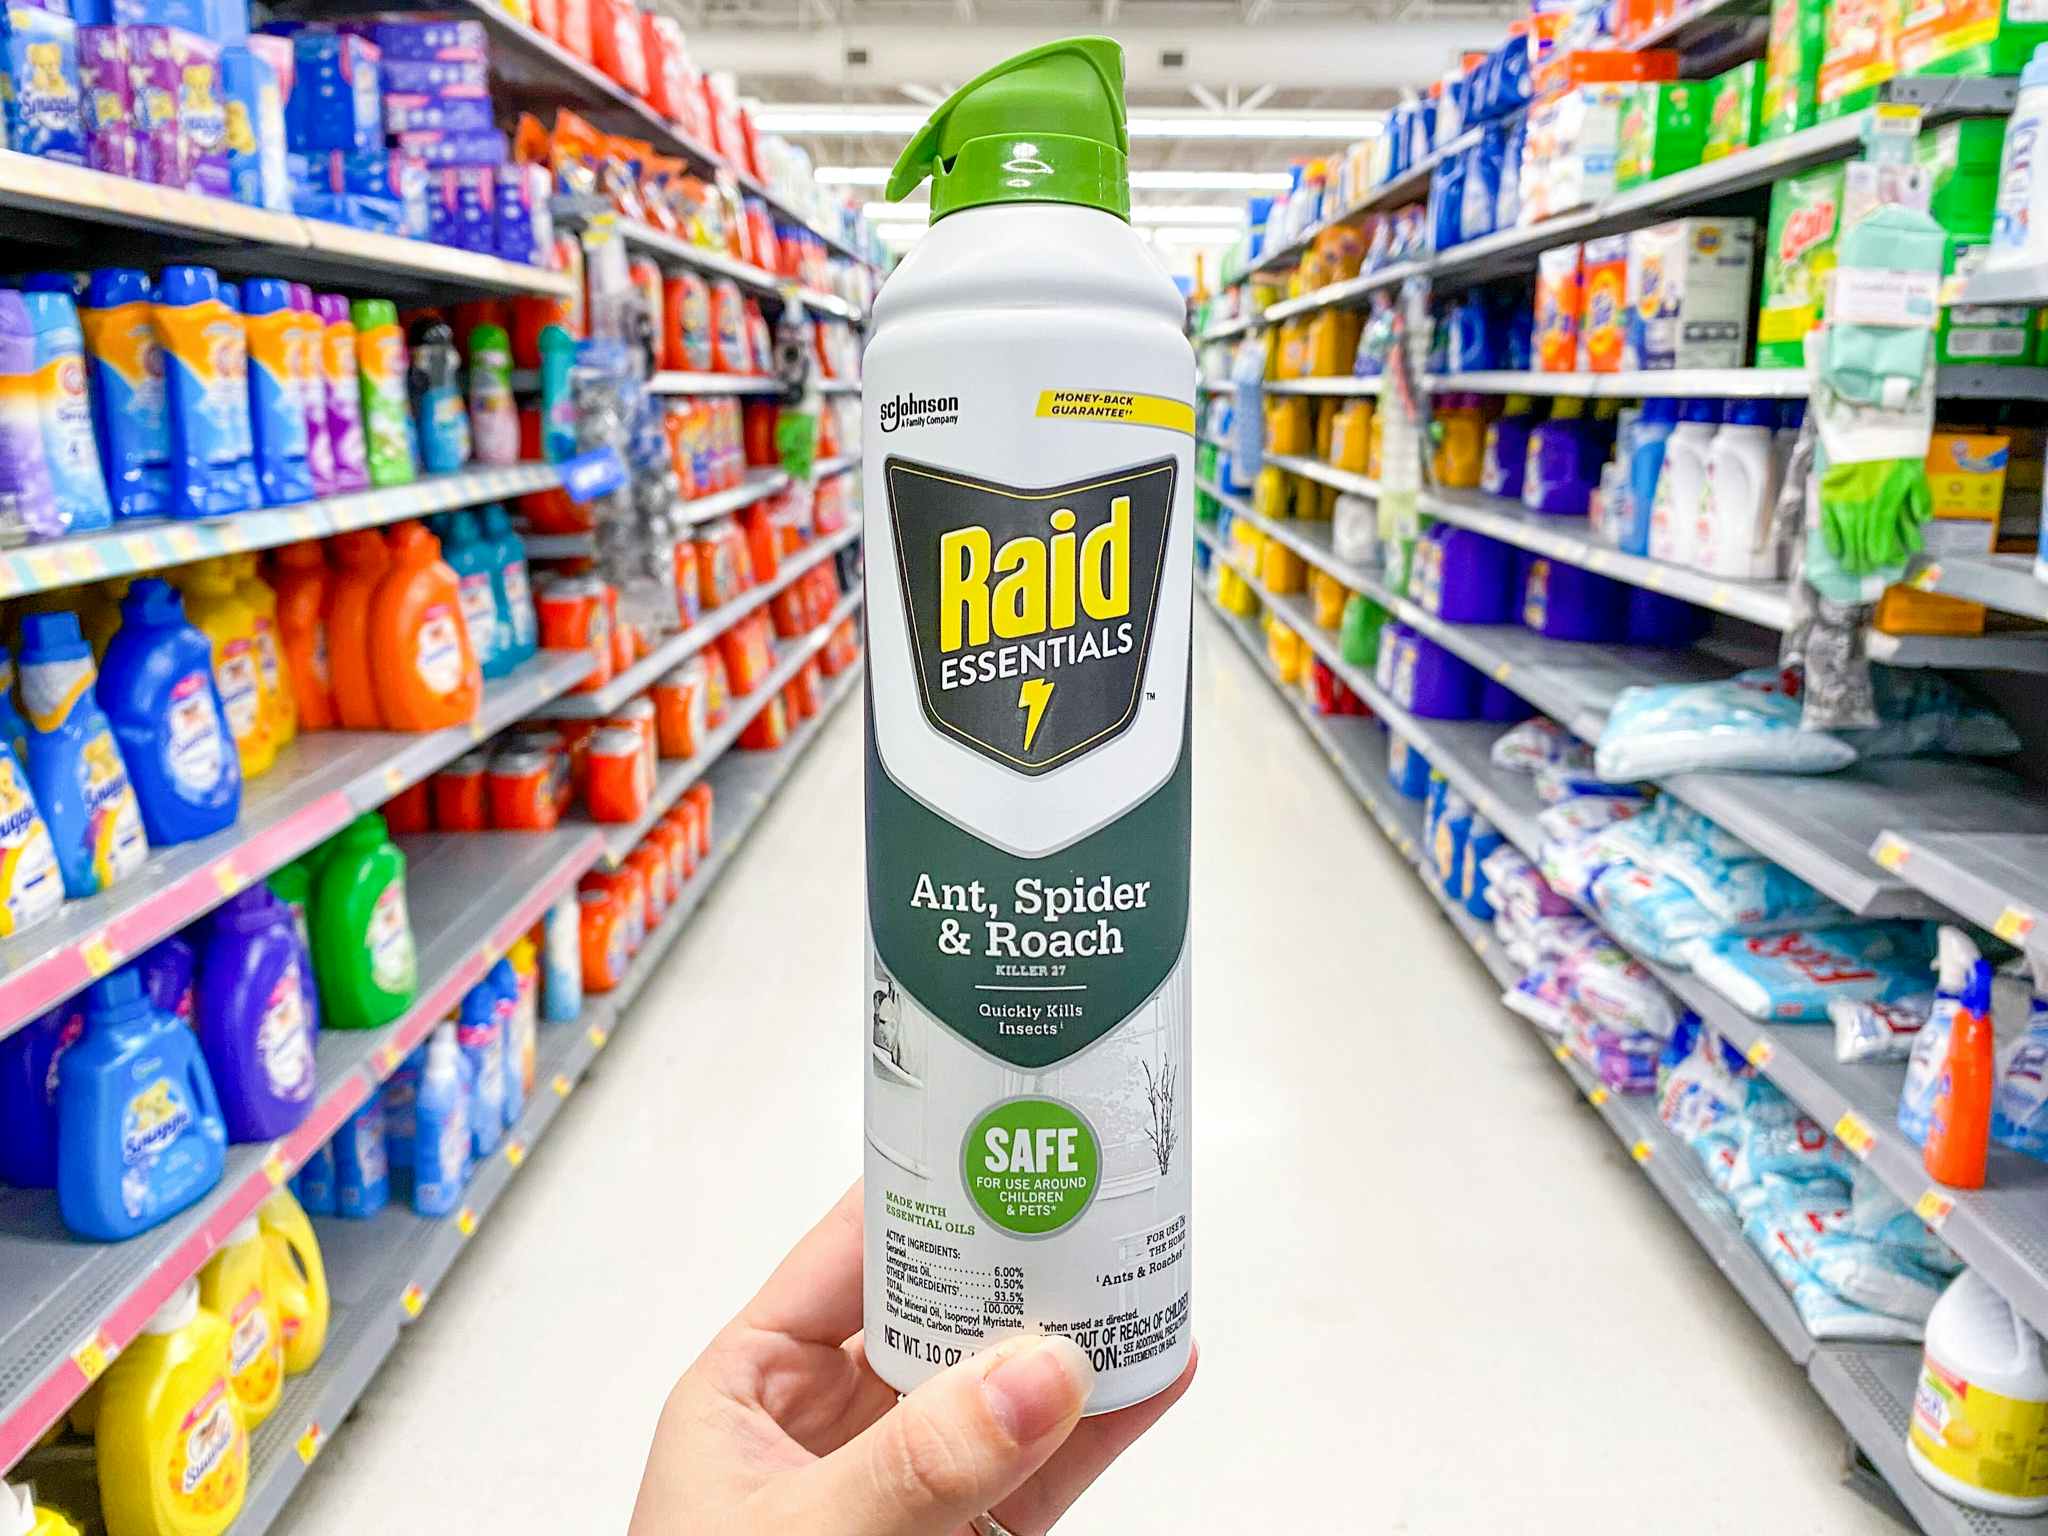 Raid Essentials Ant, Spider, and Roach Killer held in aisle at Walmart